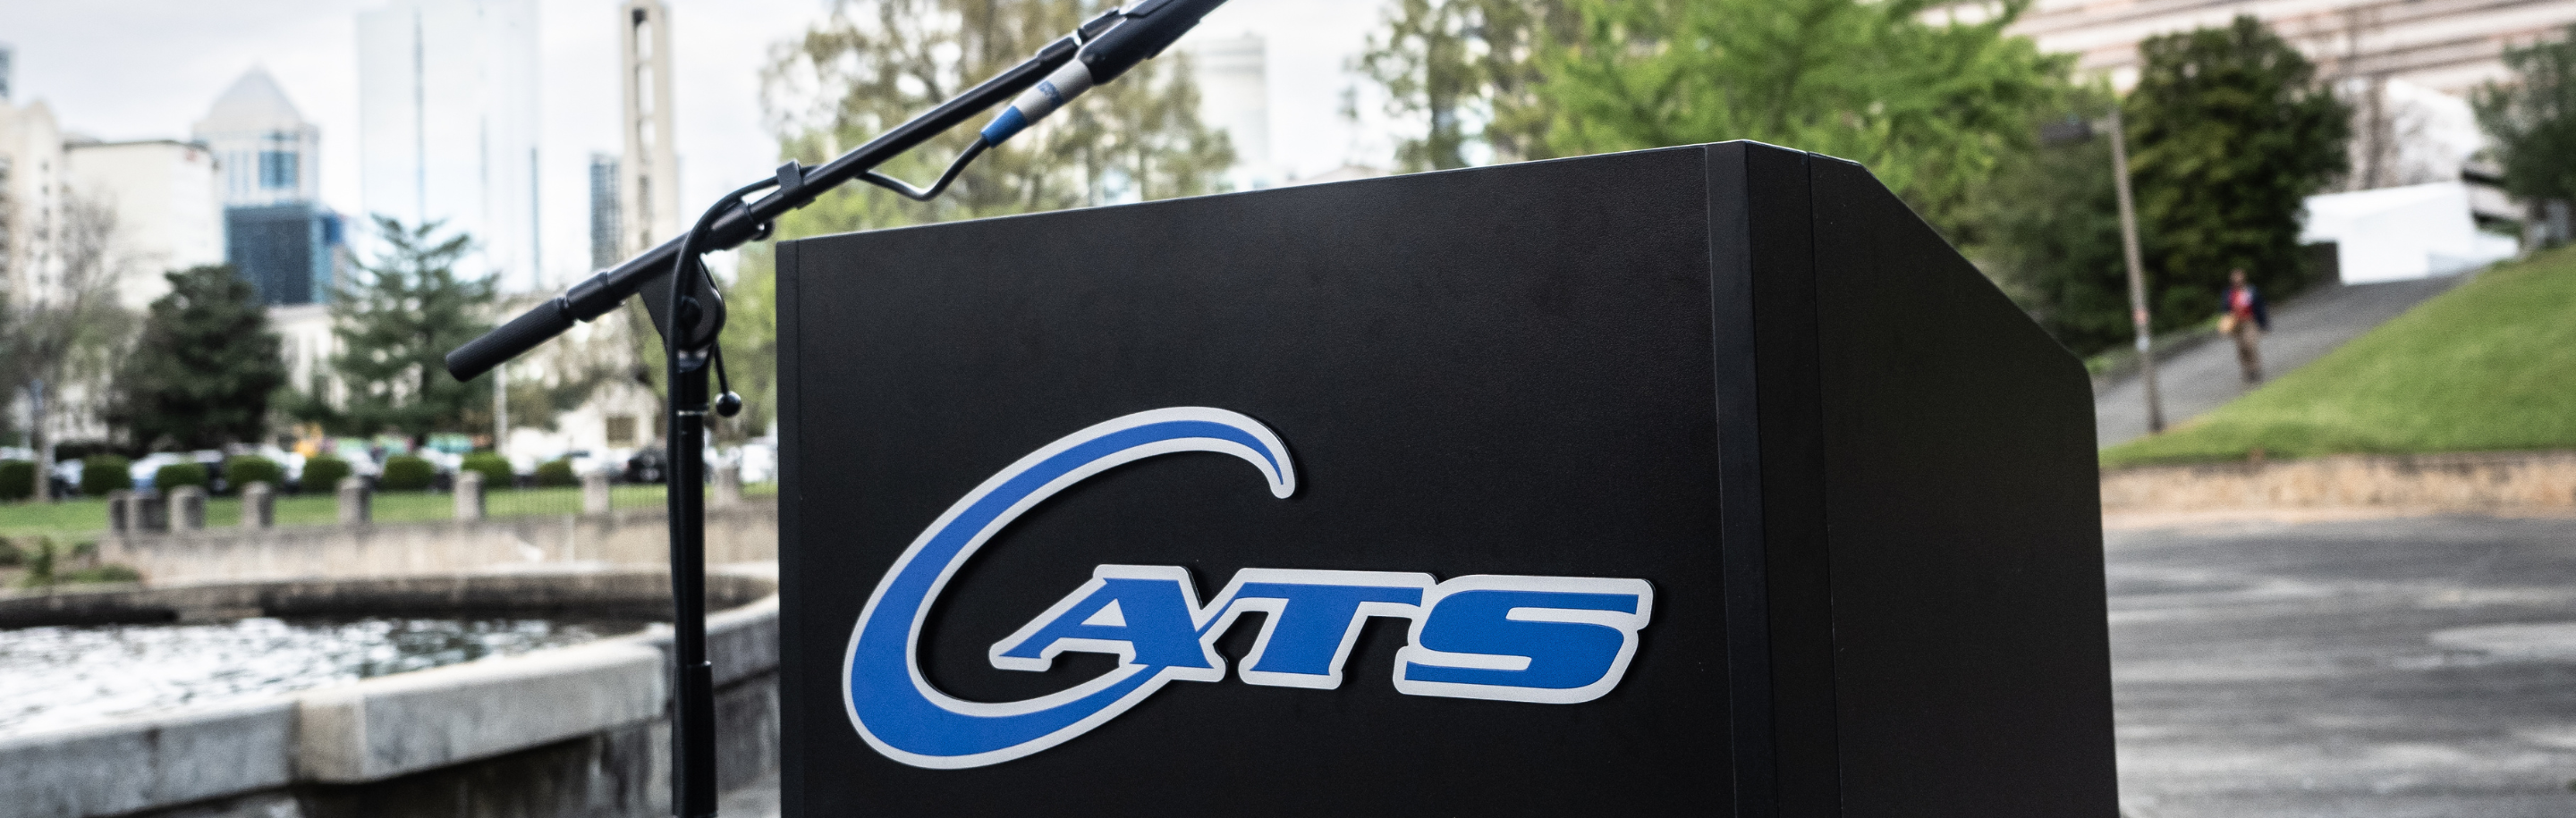 CATS podium used for media events, with the CATS logo on the front